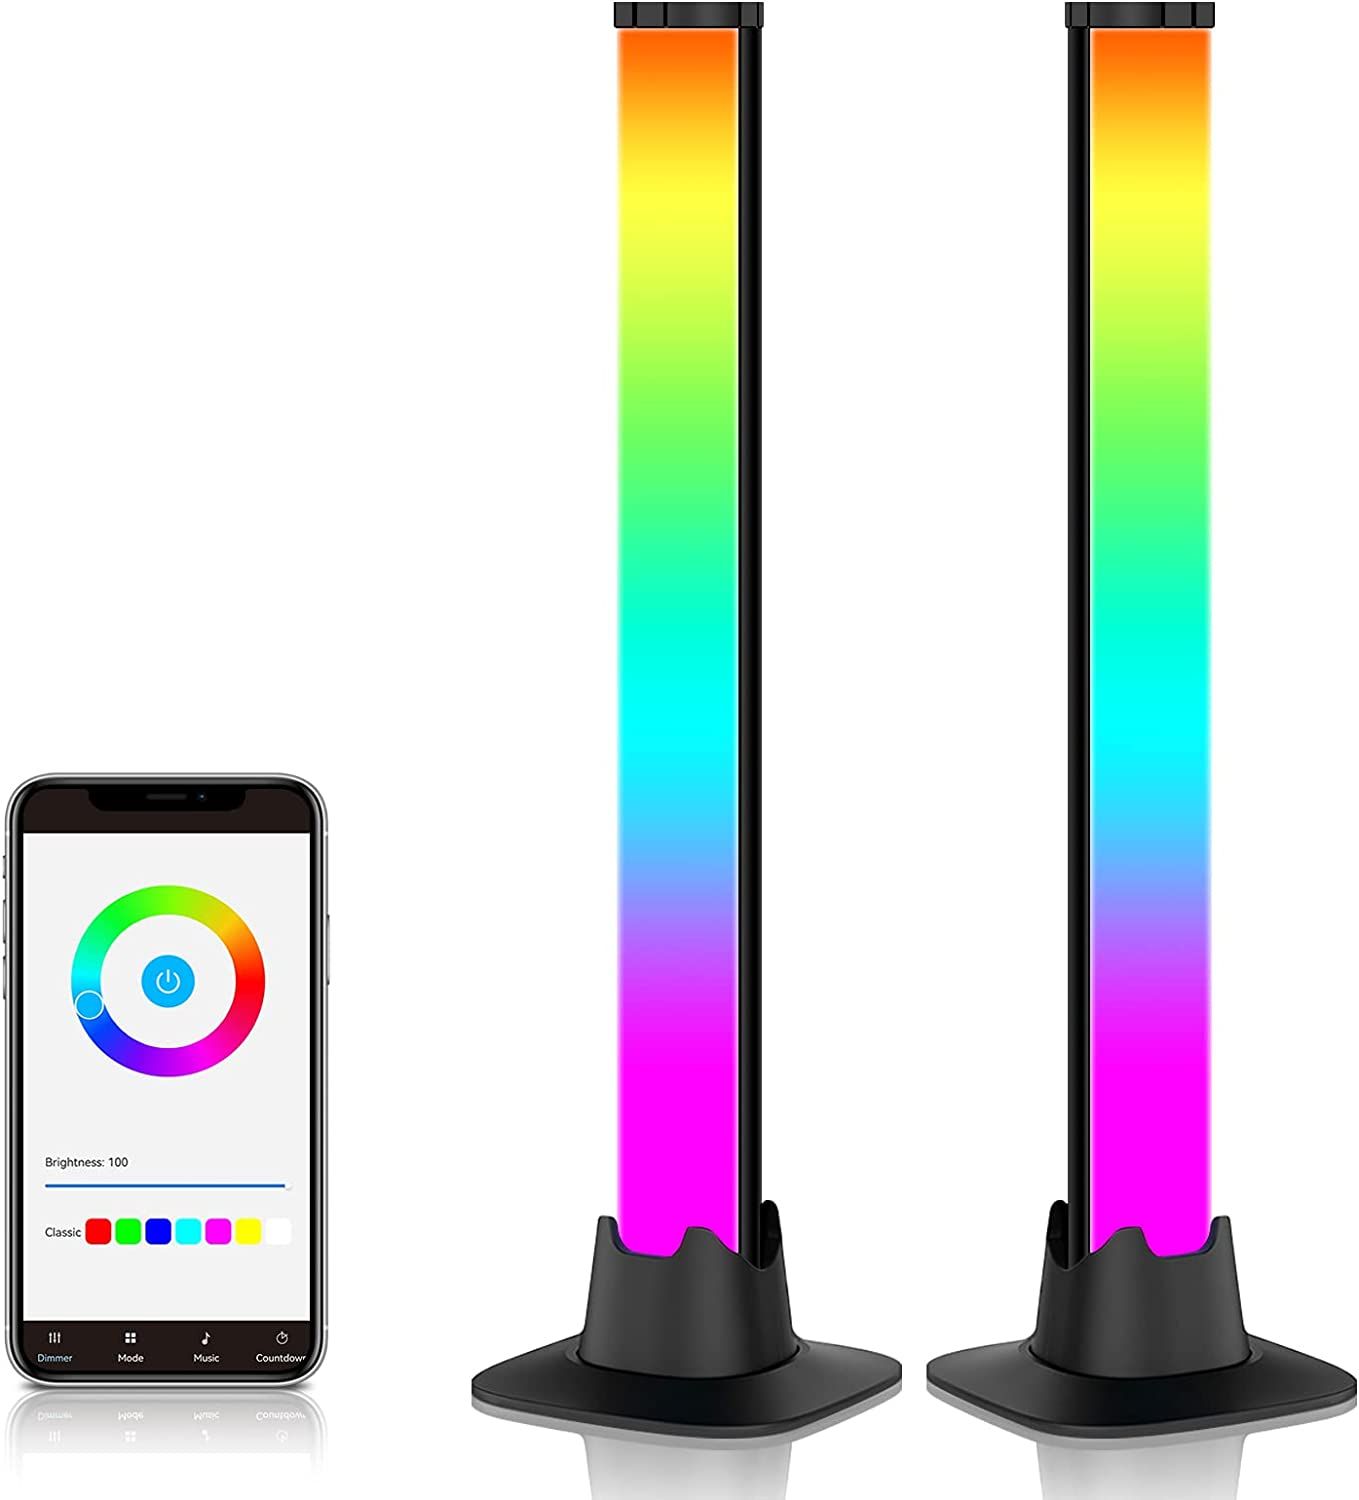 Smart LED light bars is one of the best cute TV accessories